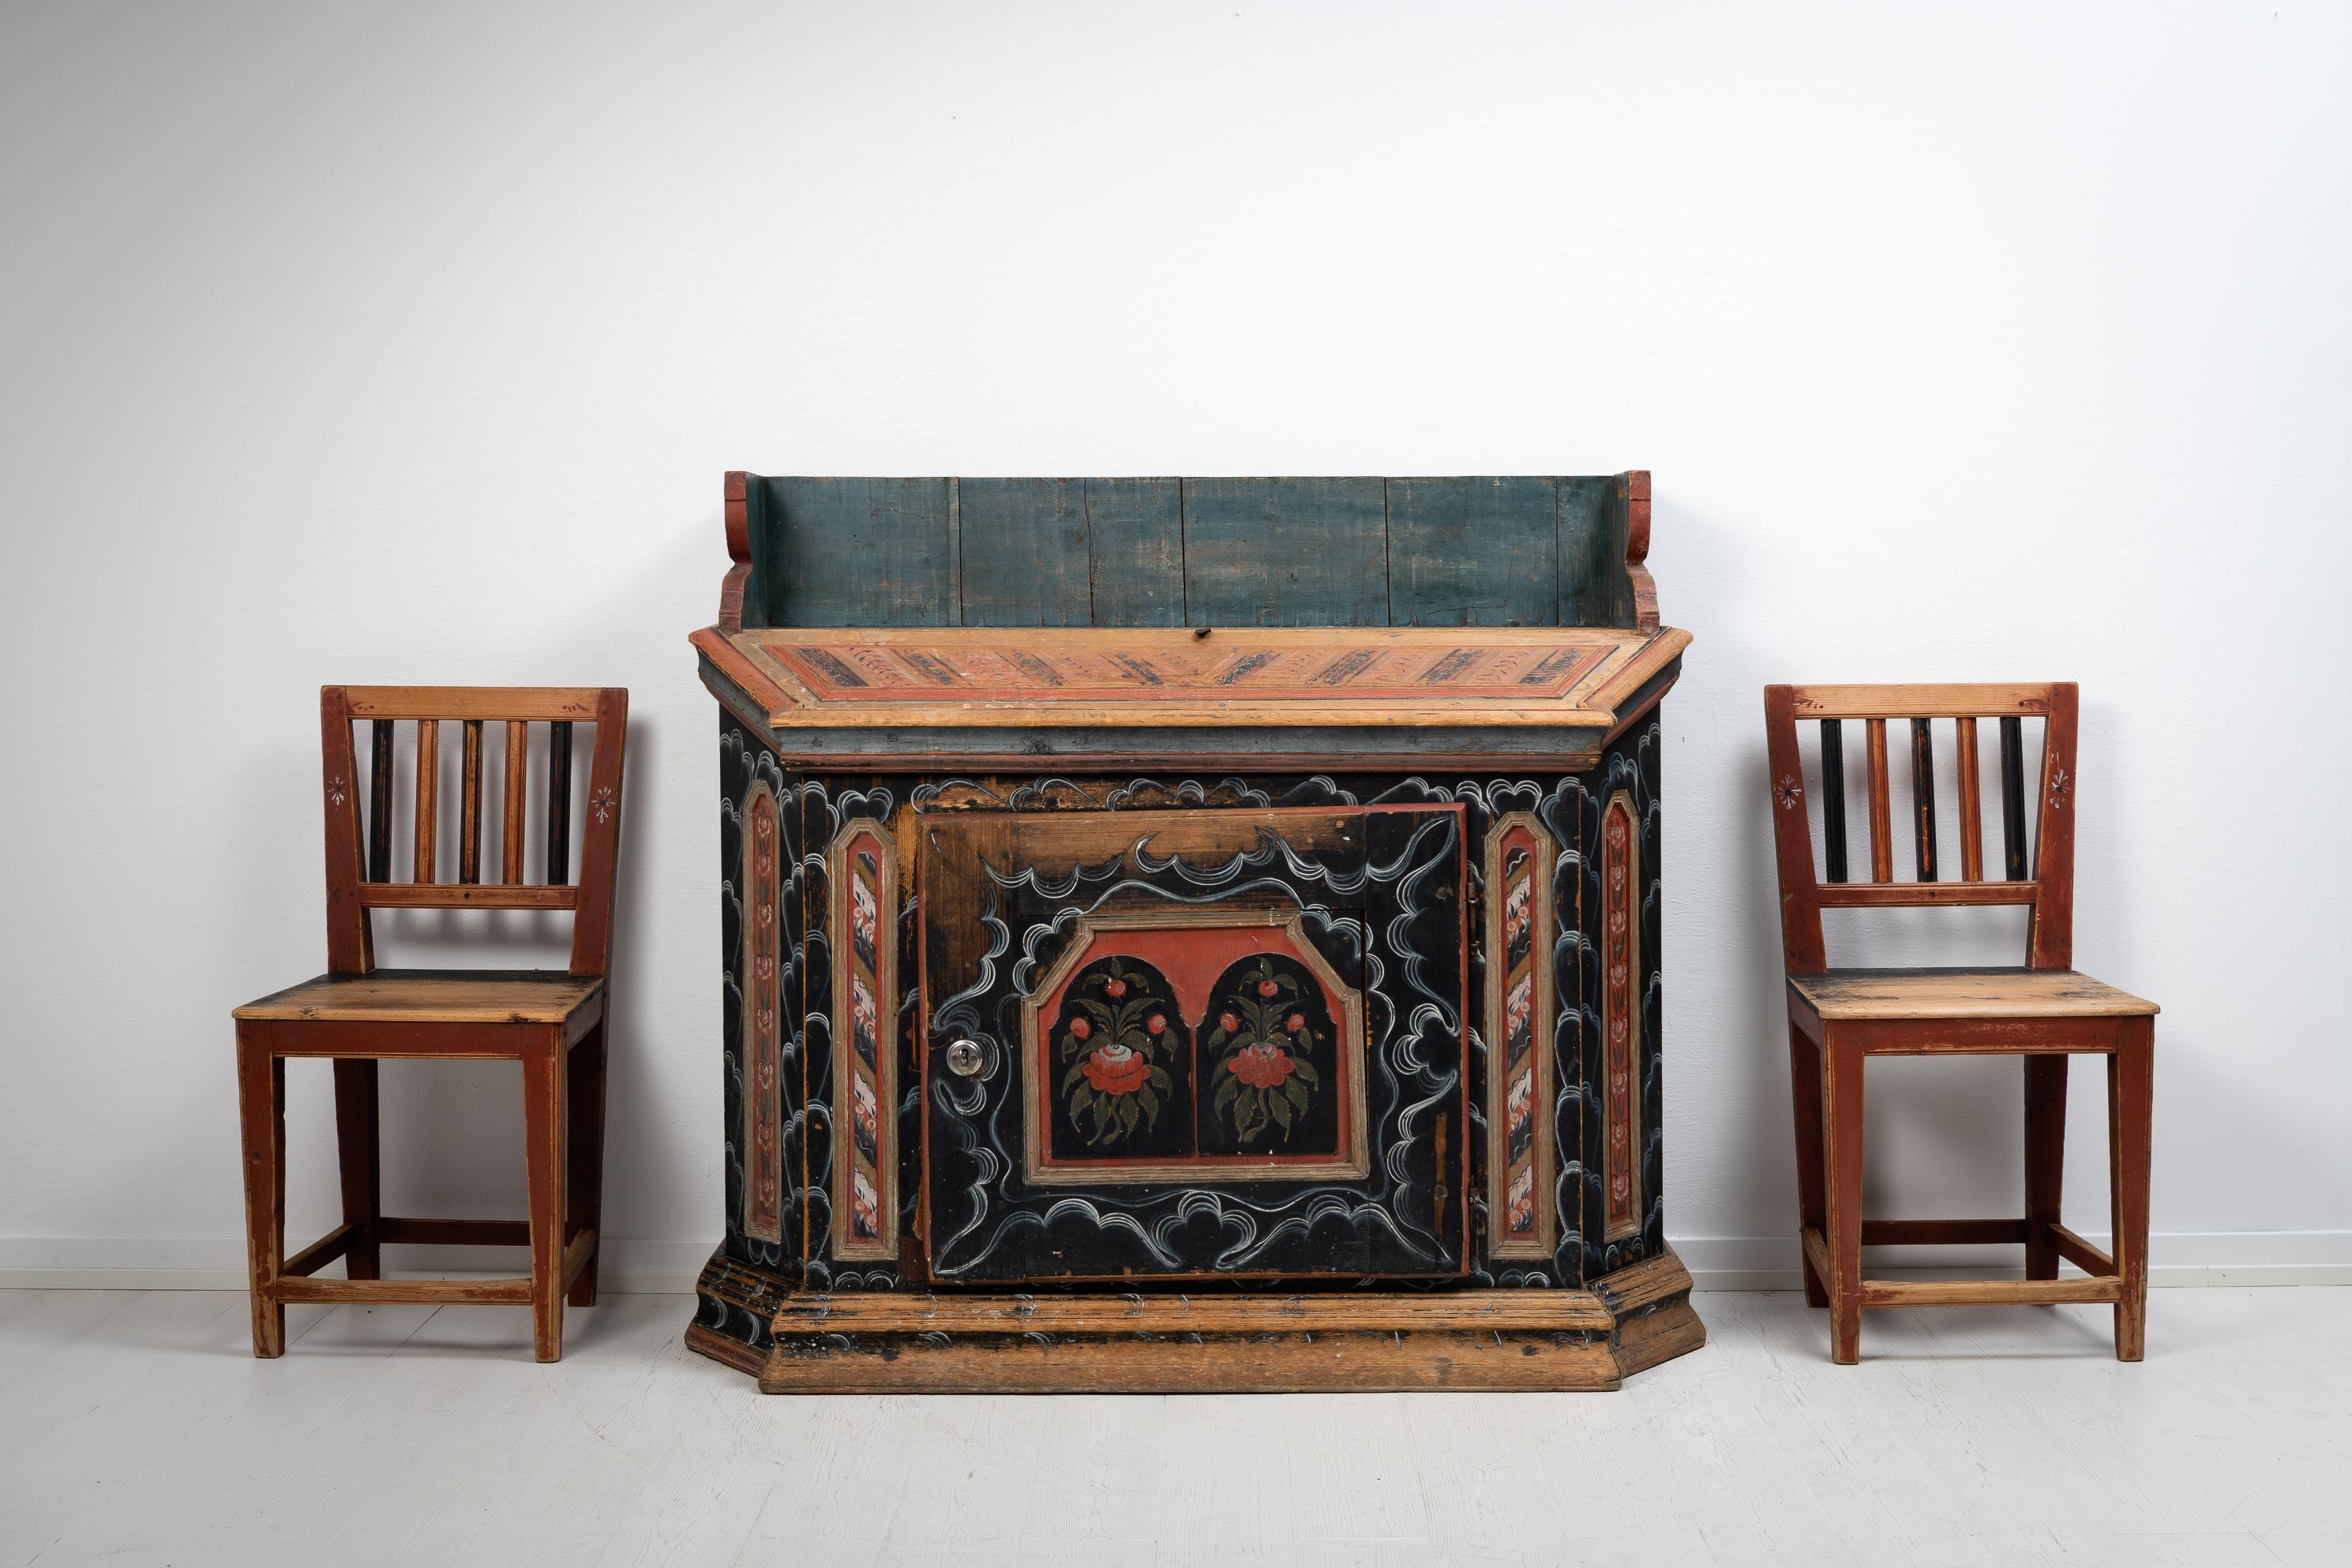 Swedish unusual folk art sideboard from Hälsingland in Sweden made during the early 1800s, around 1820 to 1830. The sideboard is painted pine with the original untouched paint. There is some distress and natural patina after use. The paint is a